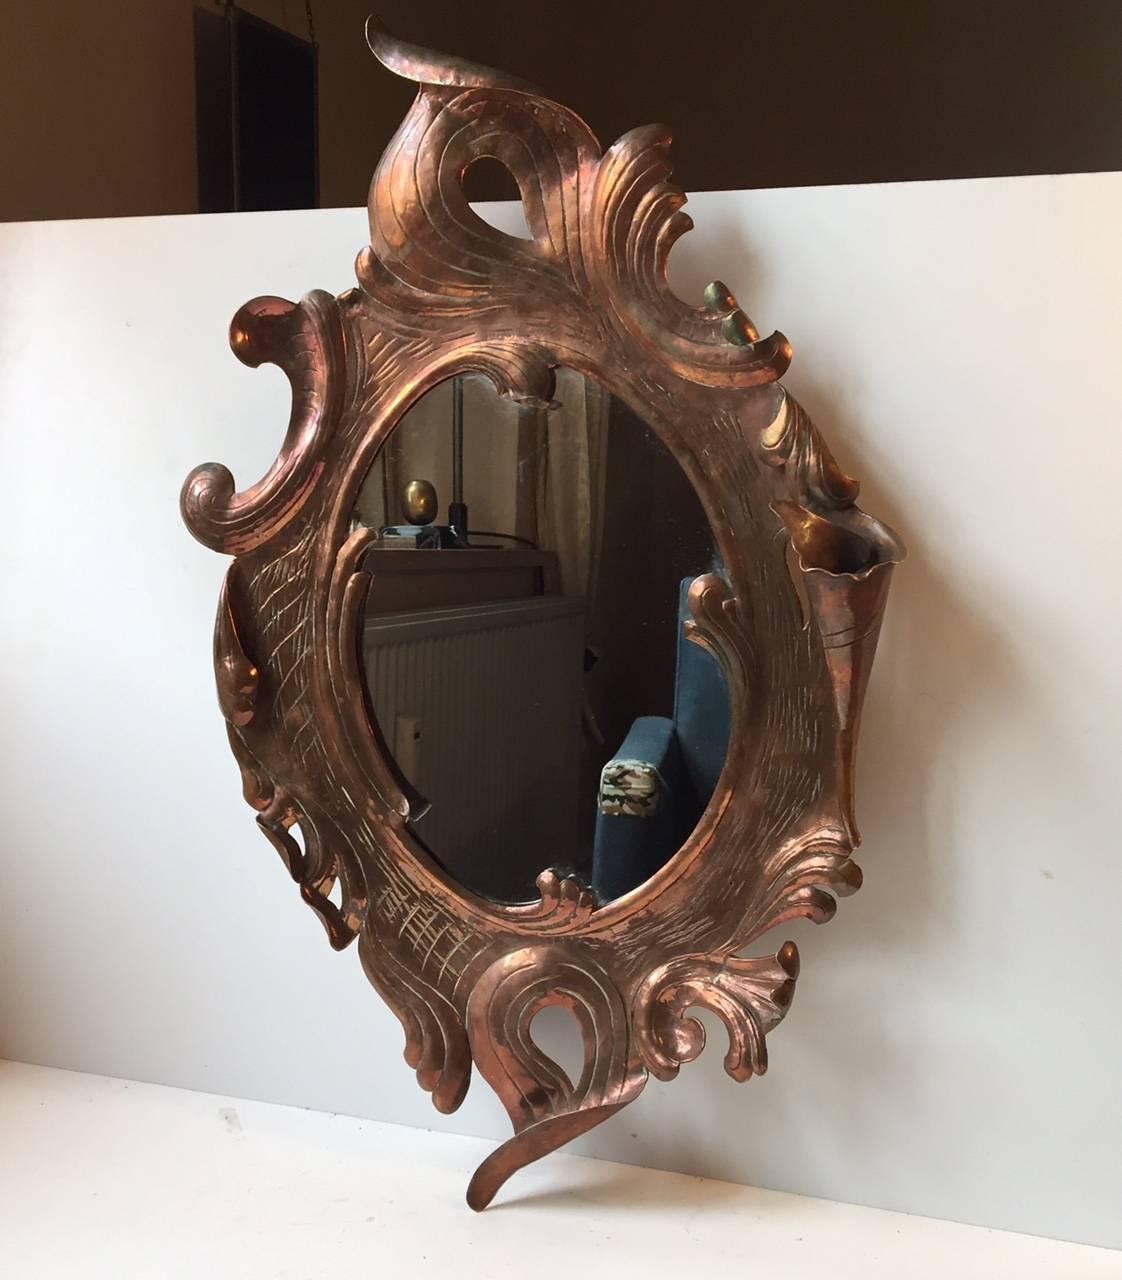 Fine French wall mirror crafted by hand in the early 20th century. Intricate details to the biomorphic shapes and florally swung details.